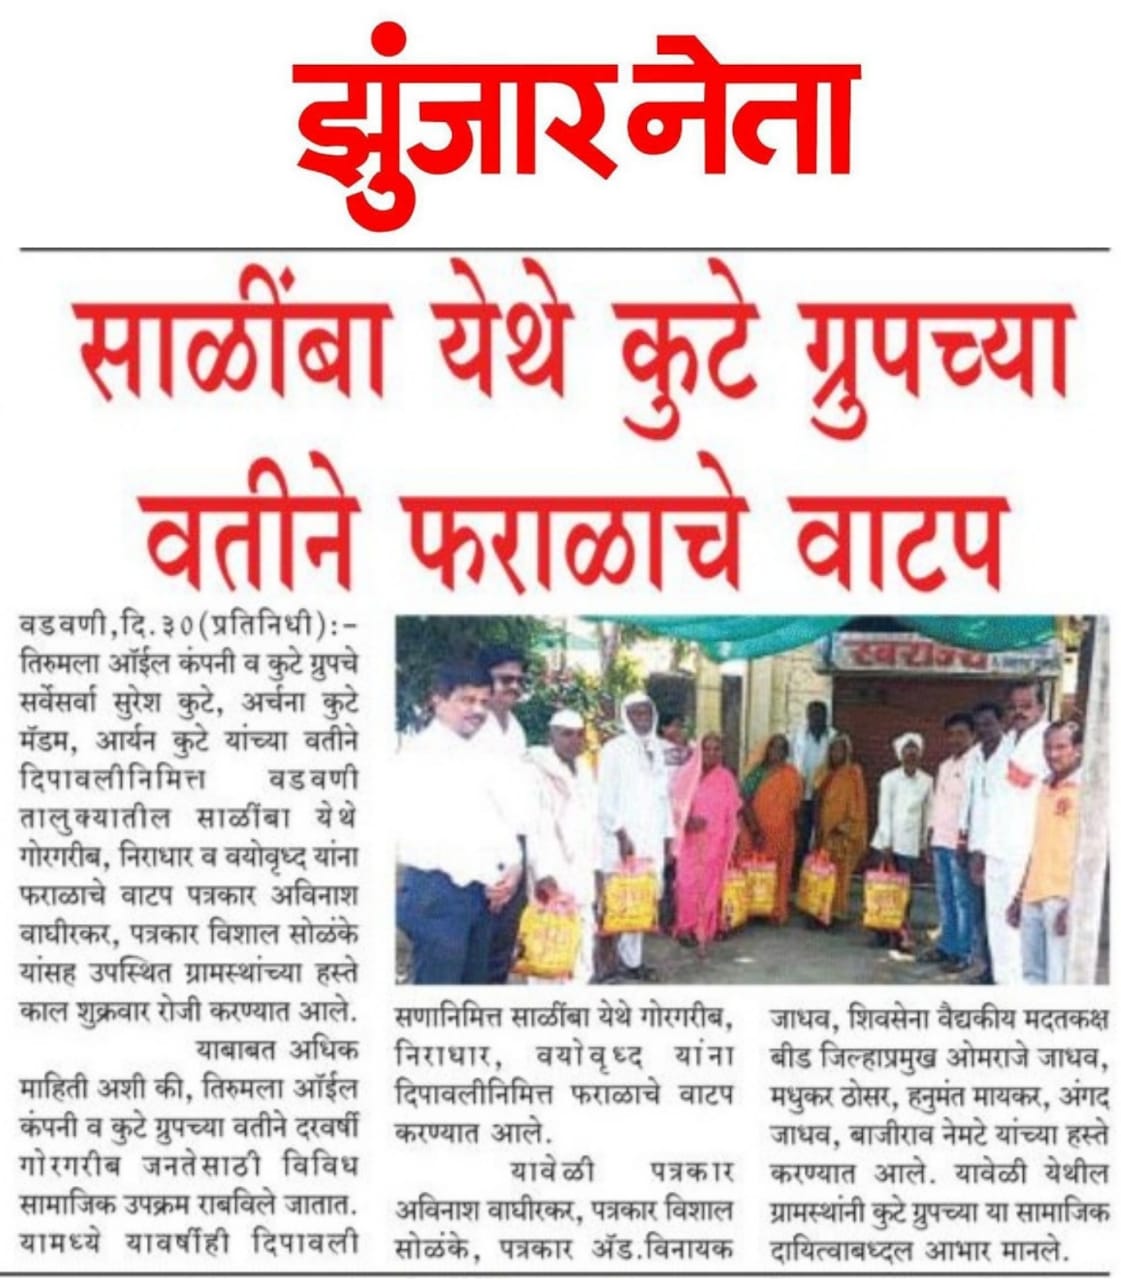 Diwali Faral was distributed to around 4000 families by the Kute Group Foundation, Featured in Dainik Jhunjar Neta